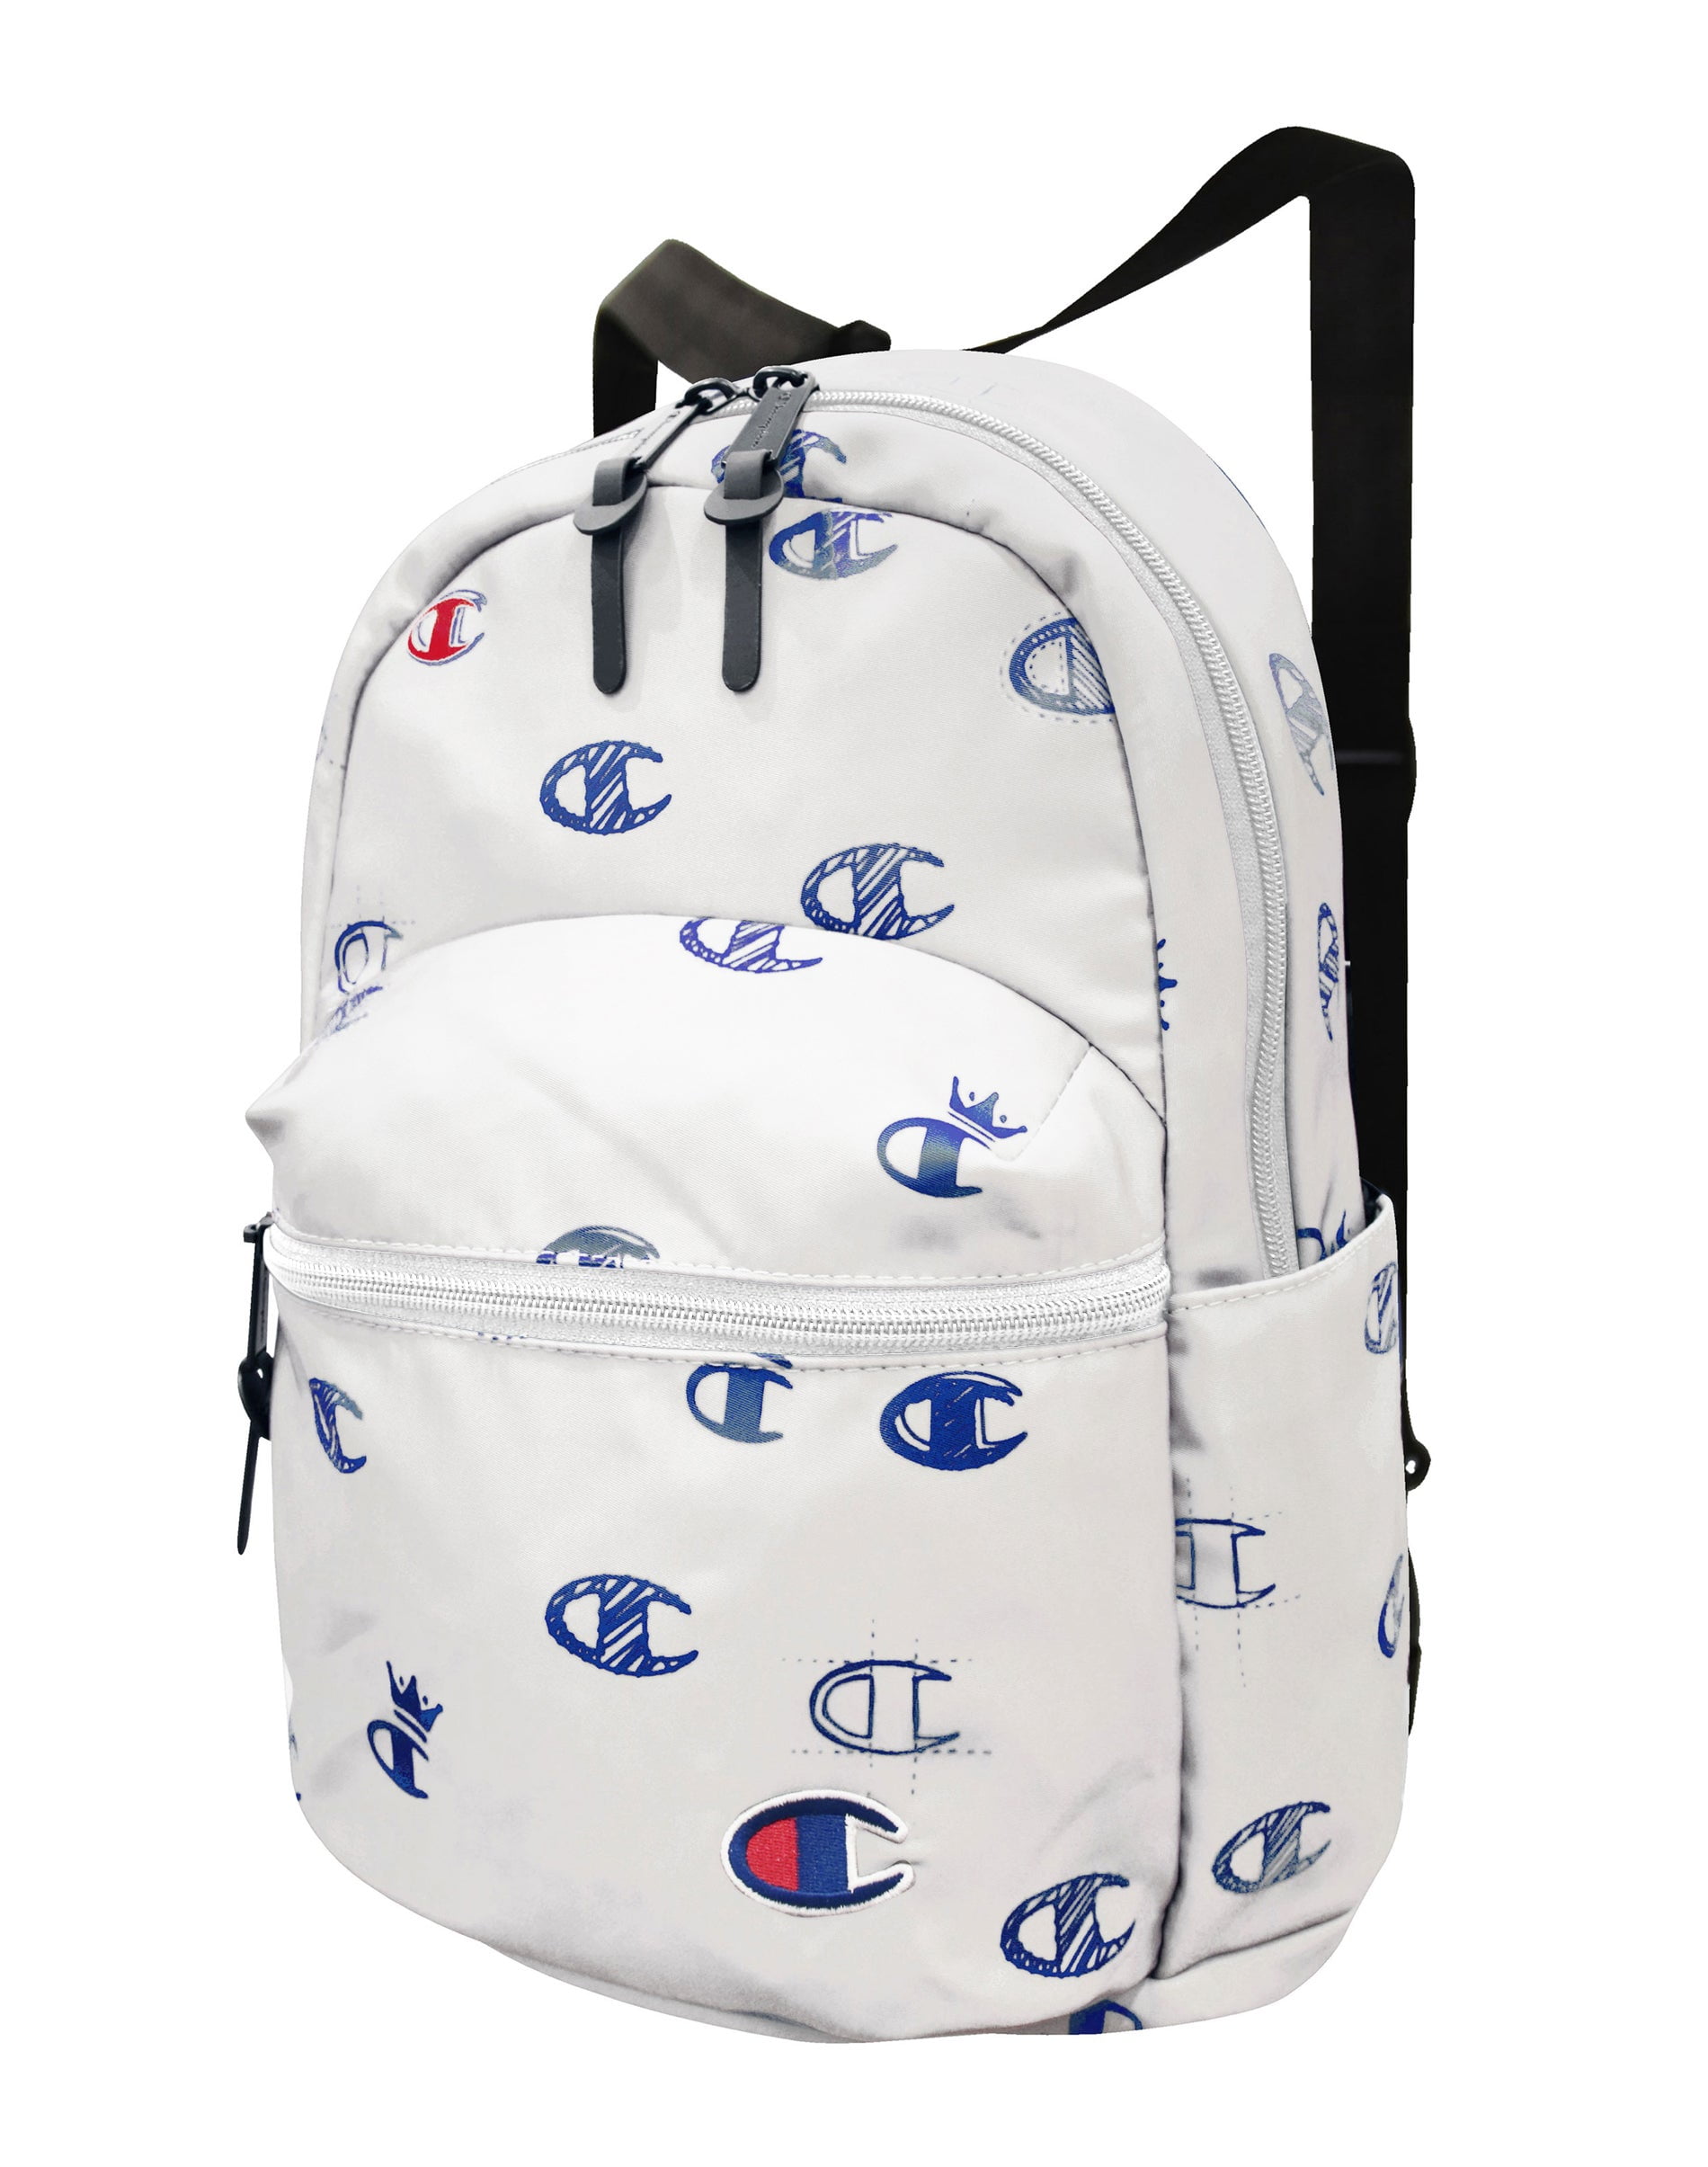 NEW CHAMPION WOMEN'S GIRLS MINI CROSSOVER BACKPACK #CH1038 